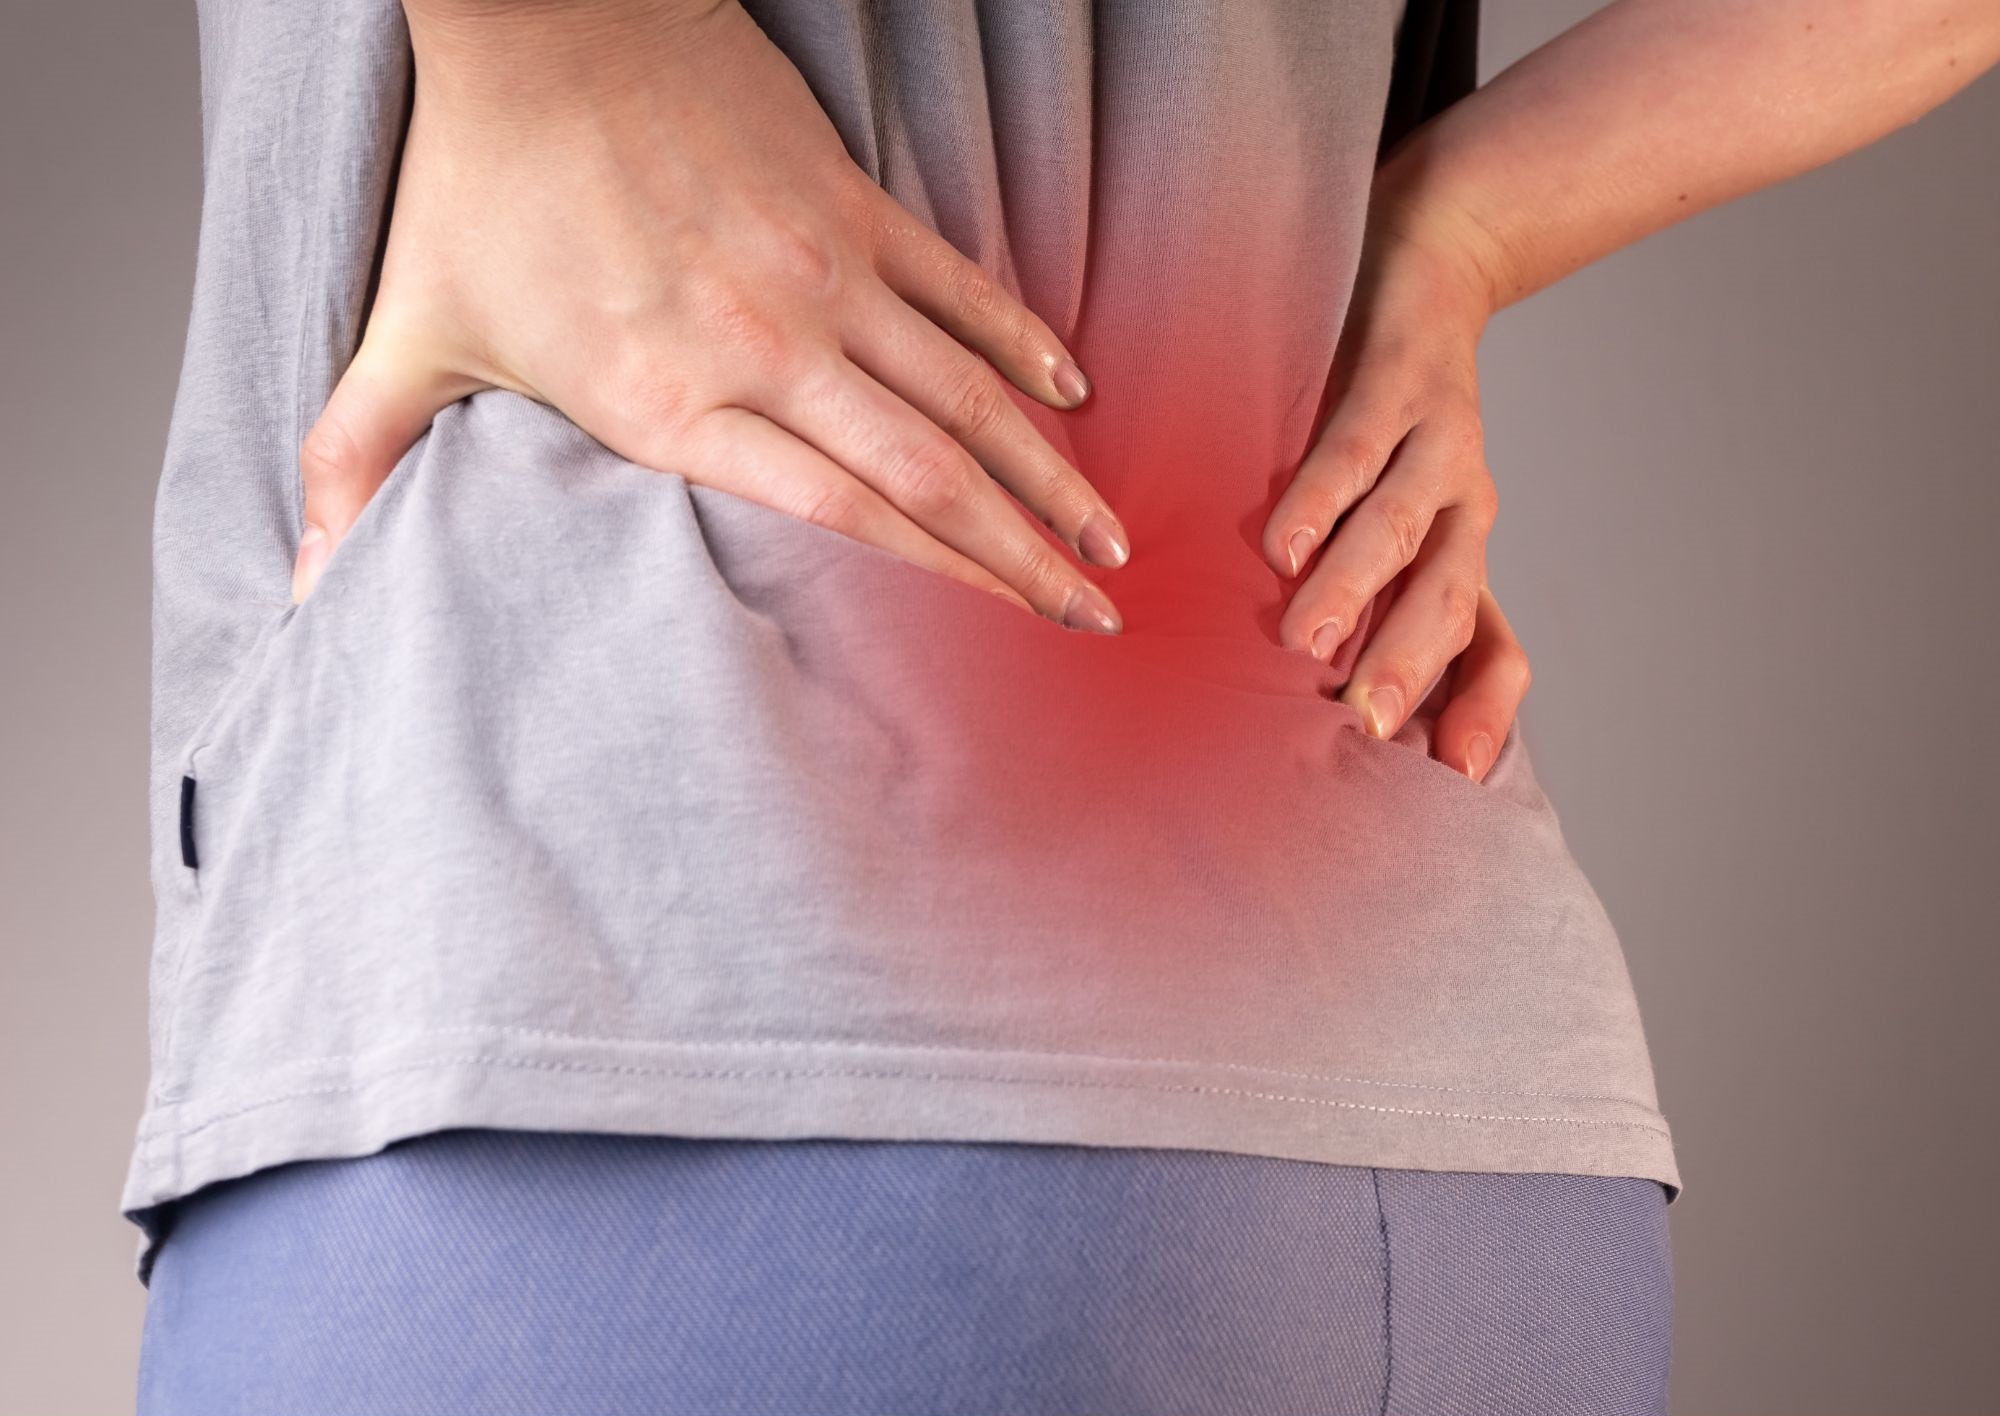 4 Ways How To Get Rid Of Sciatica Pain Permanently And Reclaim Your Active Life